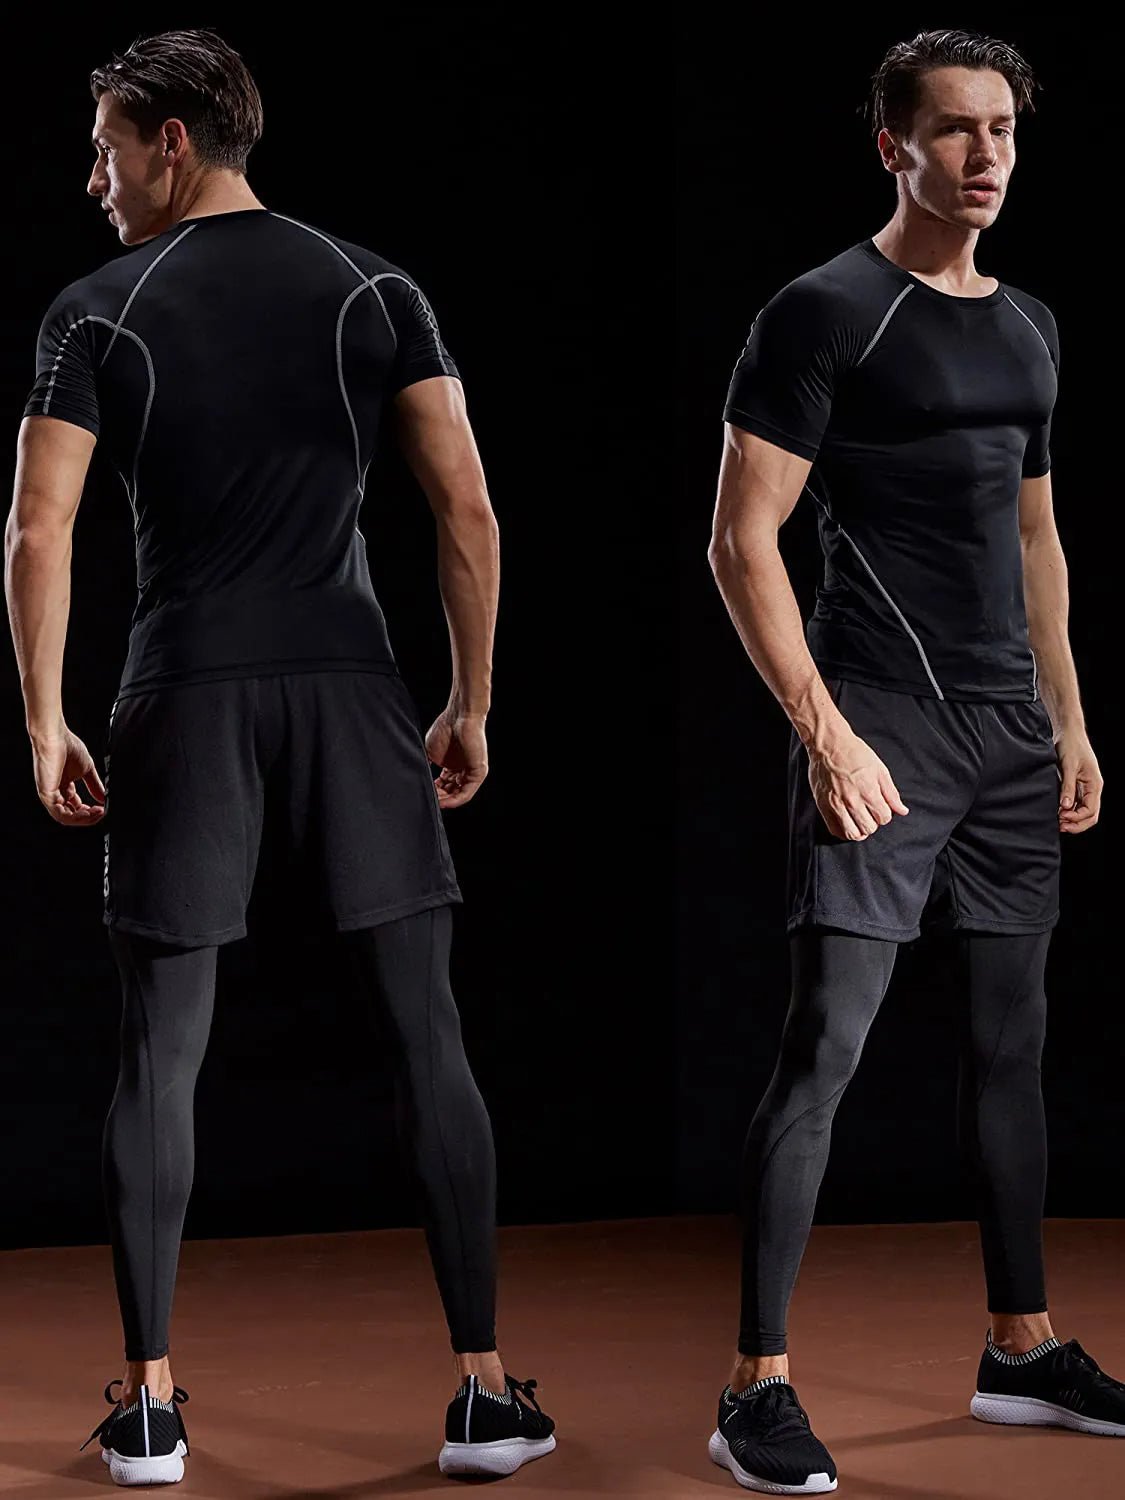 NYHET Gympower Compression T-Shirt - Gympower